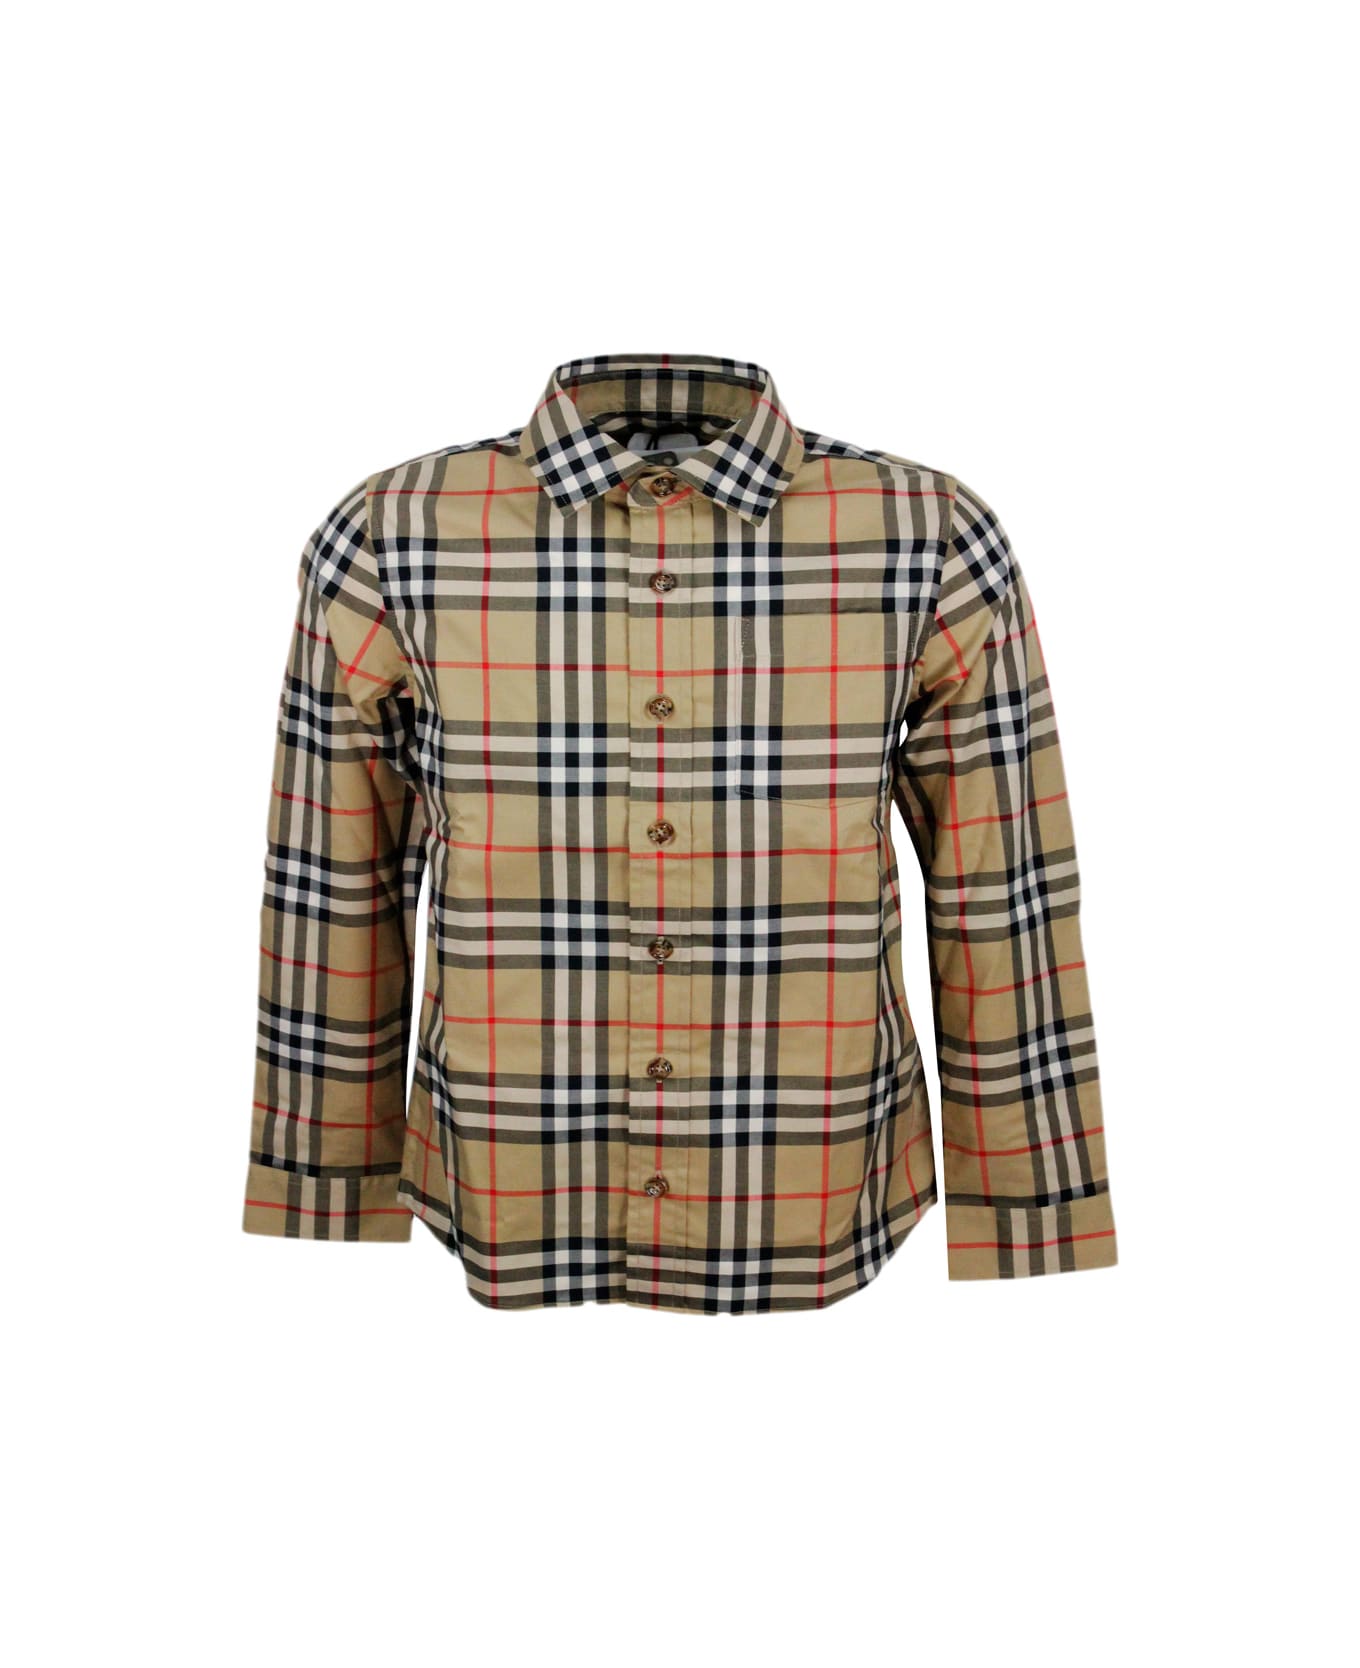 Burberry Stretch Cotton Twill Shirt With Patch Pocket On The Chest In A Vintage Check Pattern - Beige シャツ